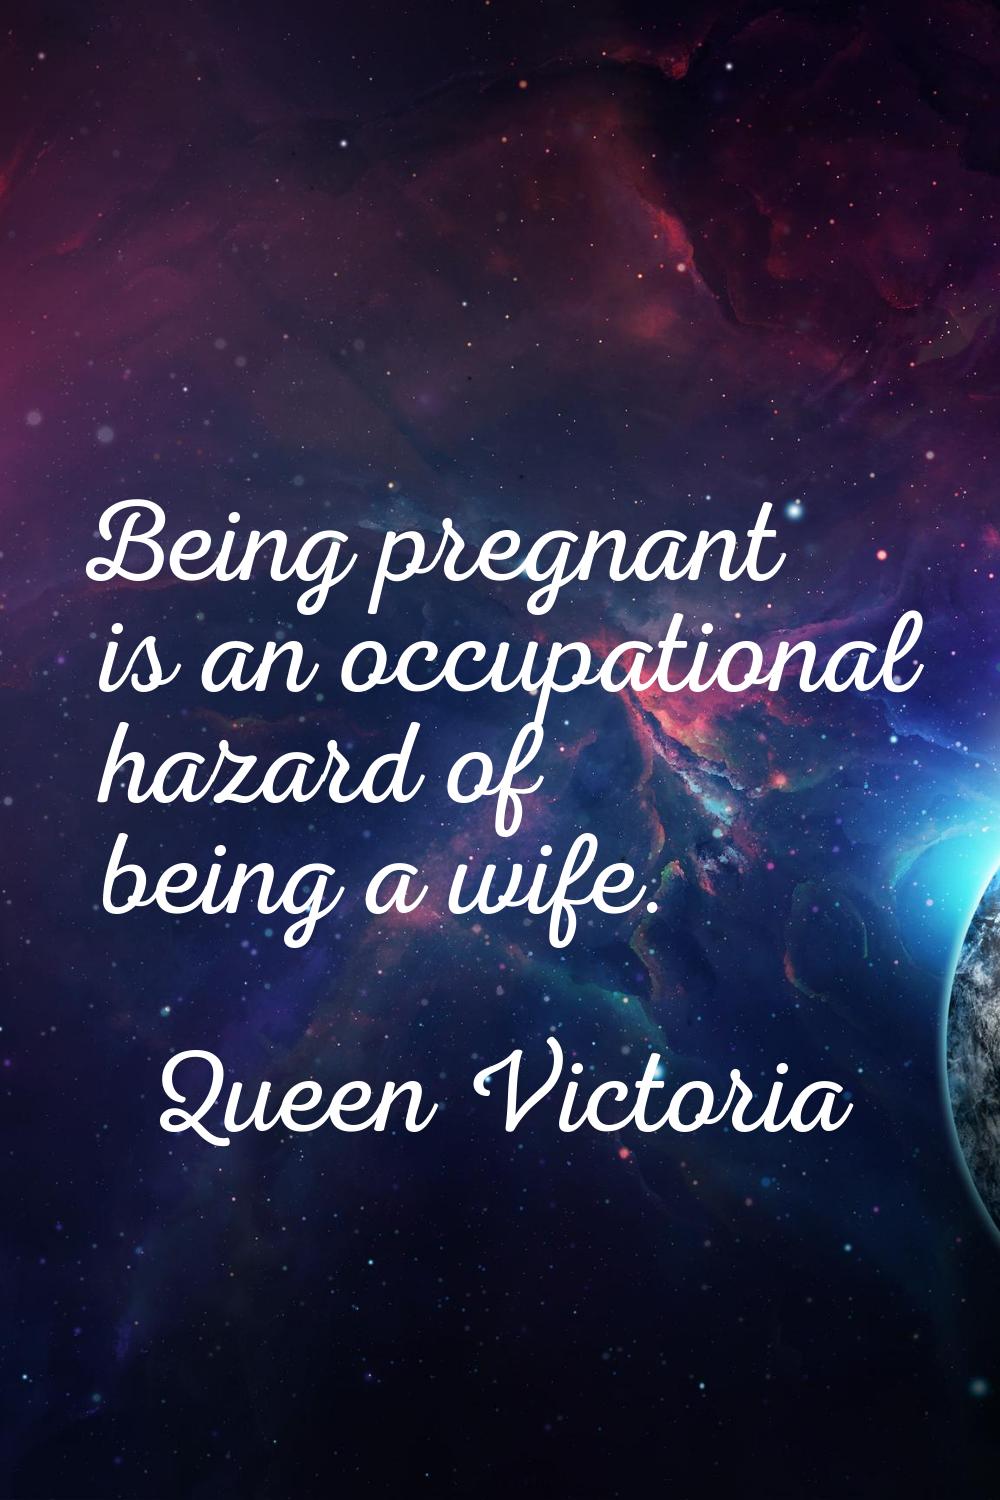 Being pregnant is an occupational hazard of being a wife.